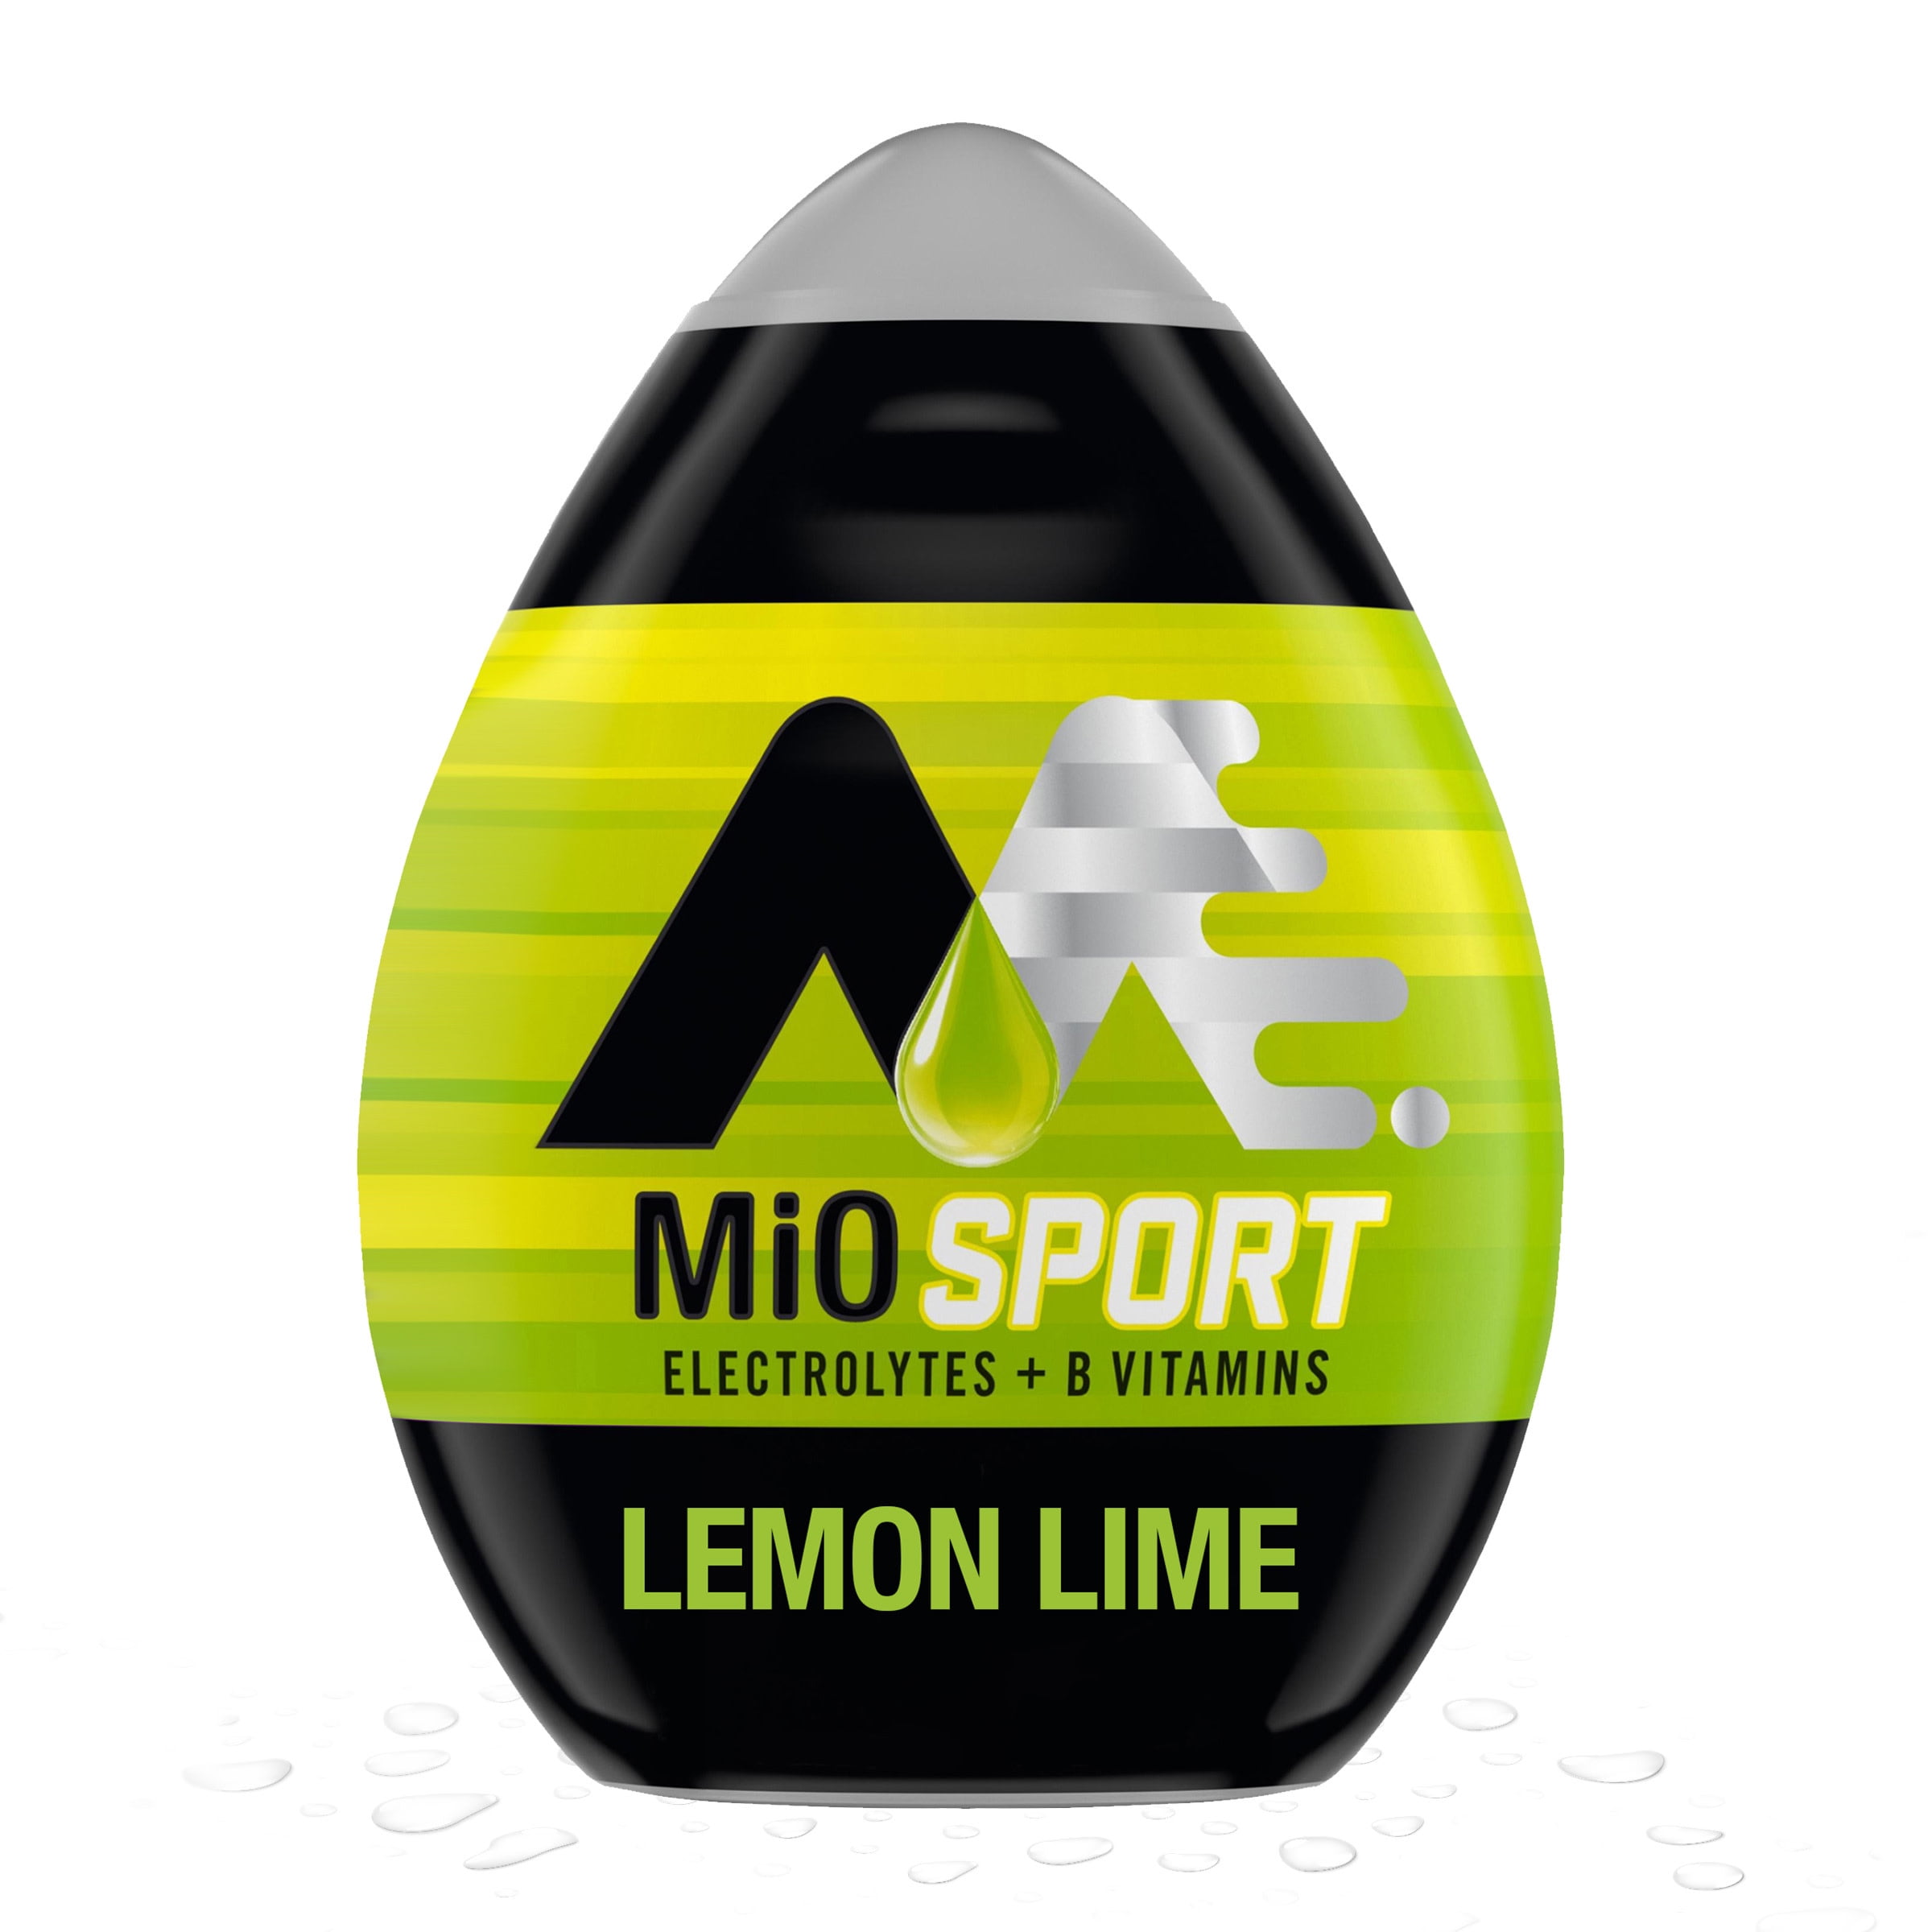 MiO Sport Lemon Lime Naturally Flavored Liquid Water Enhancer with Electrolytes and B Vitamins, 1.62 fl oz Bottle